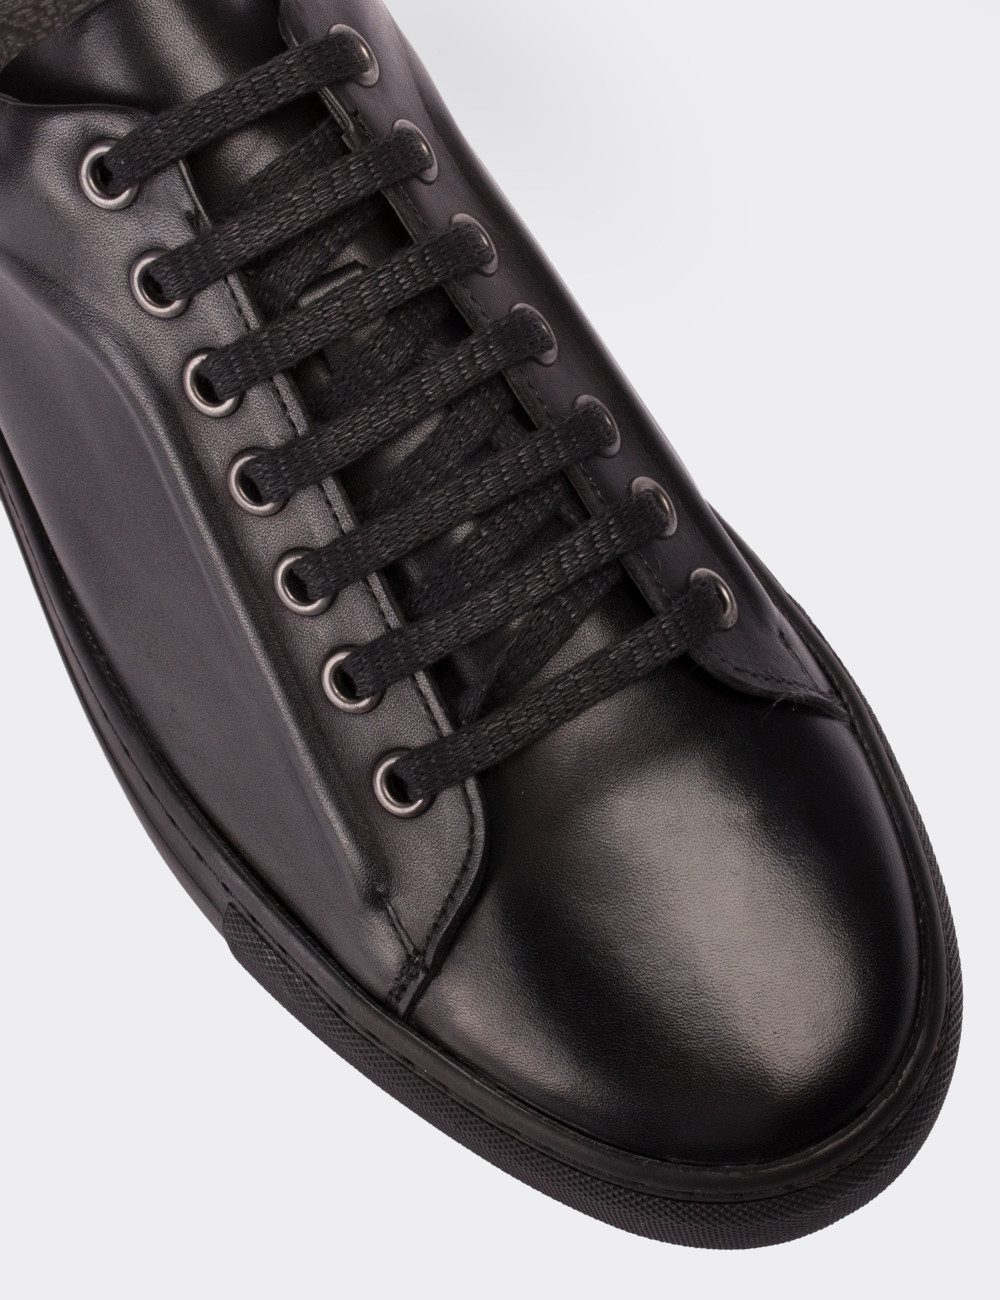 Gnide amme Tradition Black Leather Sneakers - Deery